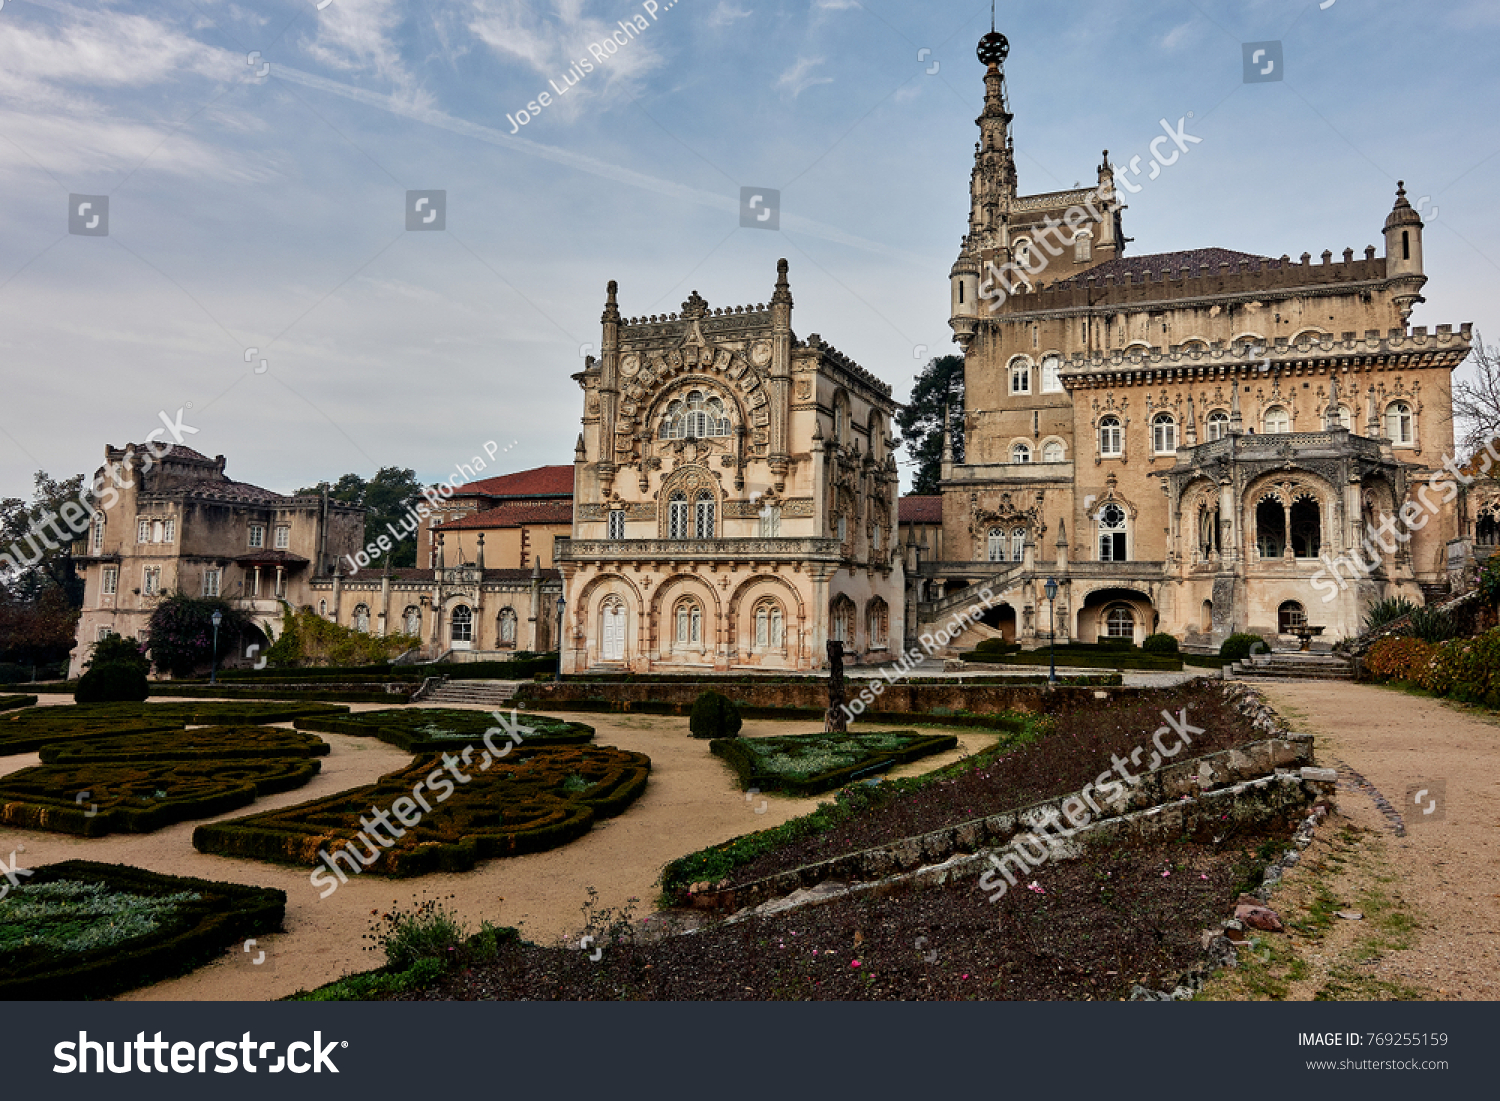 Great Landscapes and Architecture From Portugal                     #769255159